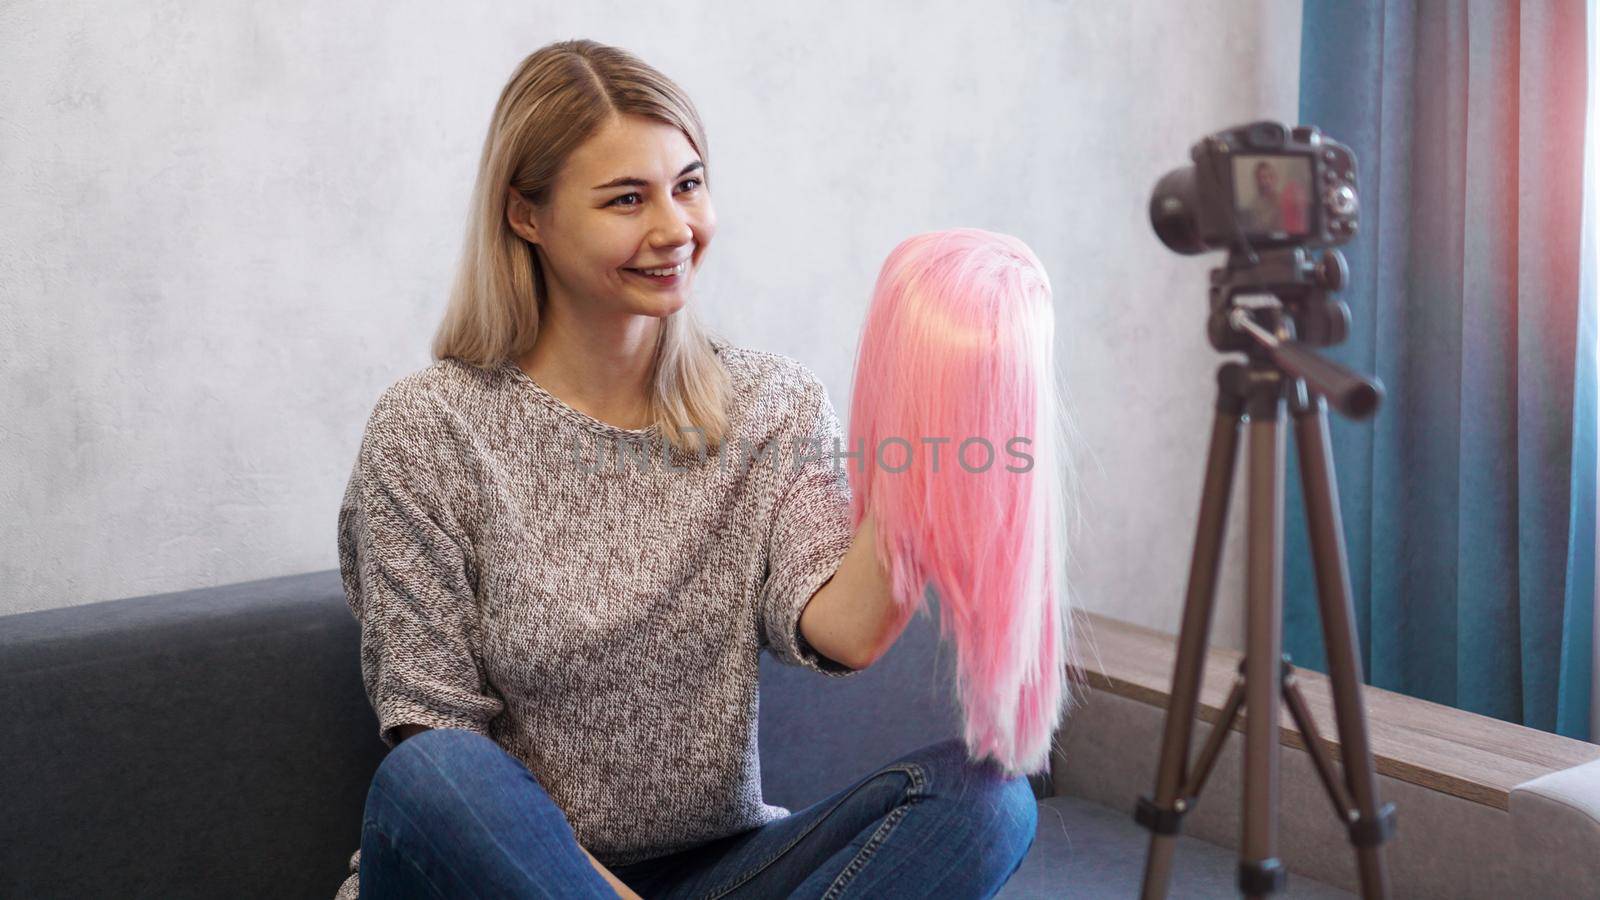 Woman blogger records video. She talks about haircuts and shows a pink wig. Stylist and fashion consultant recording the lecture